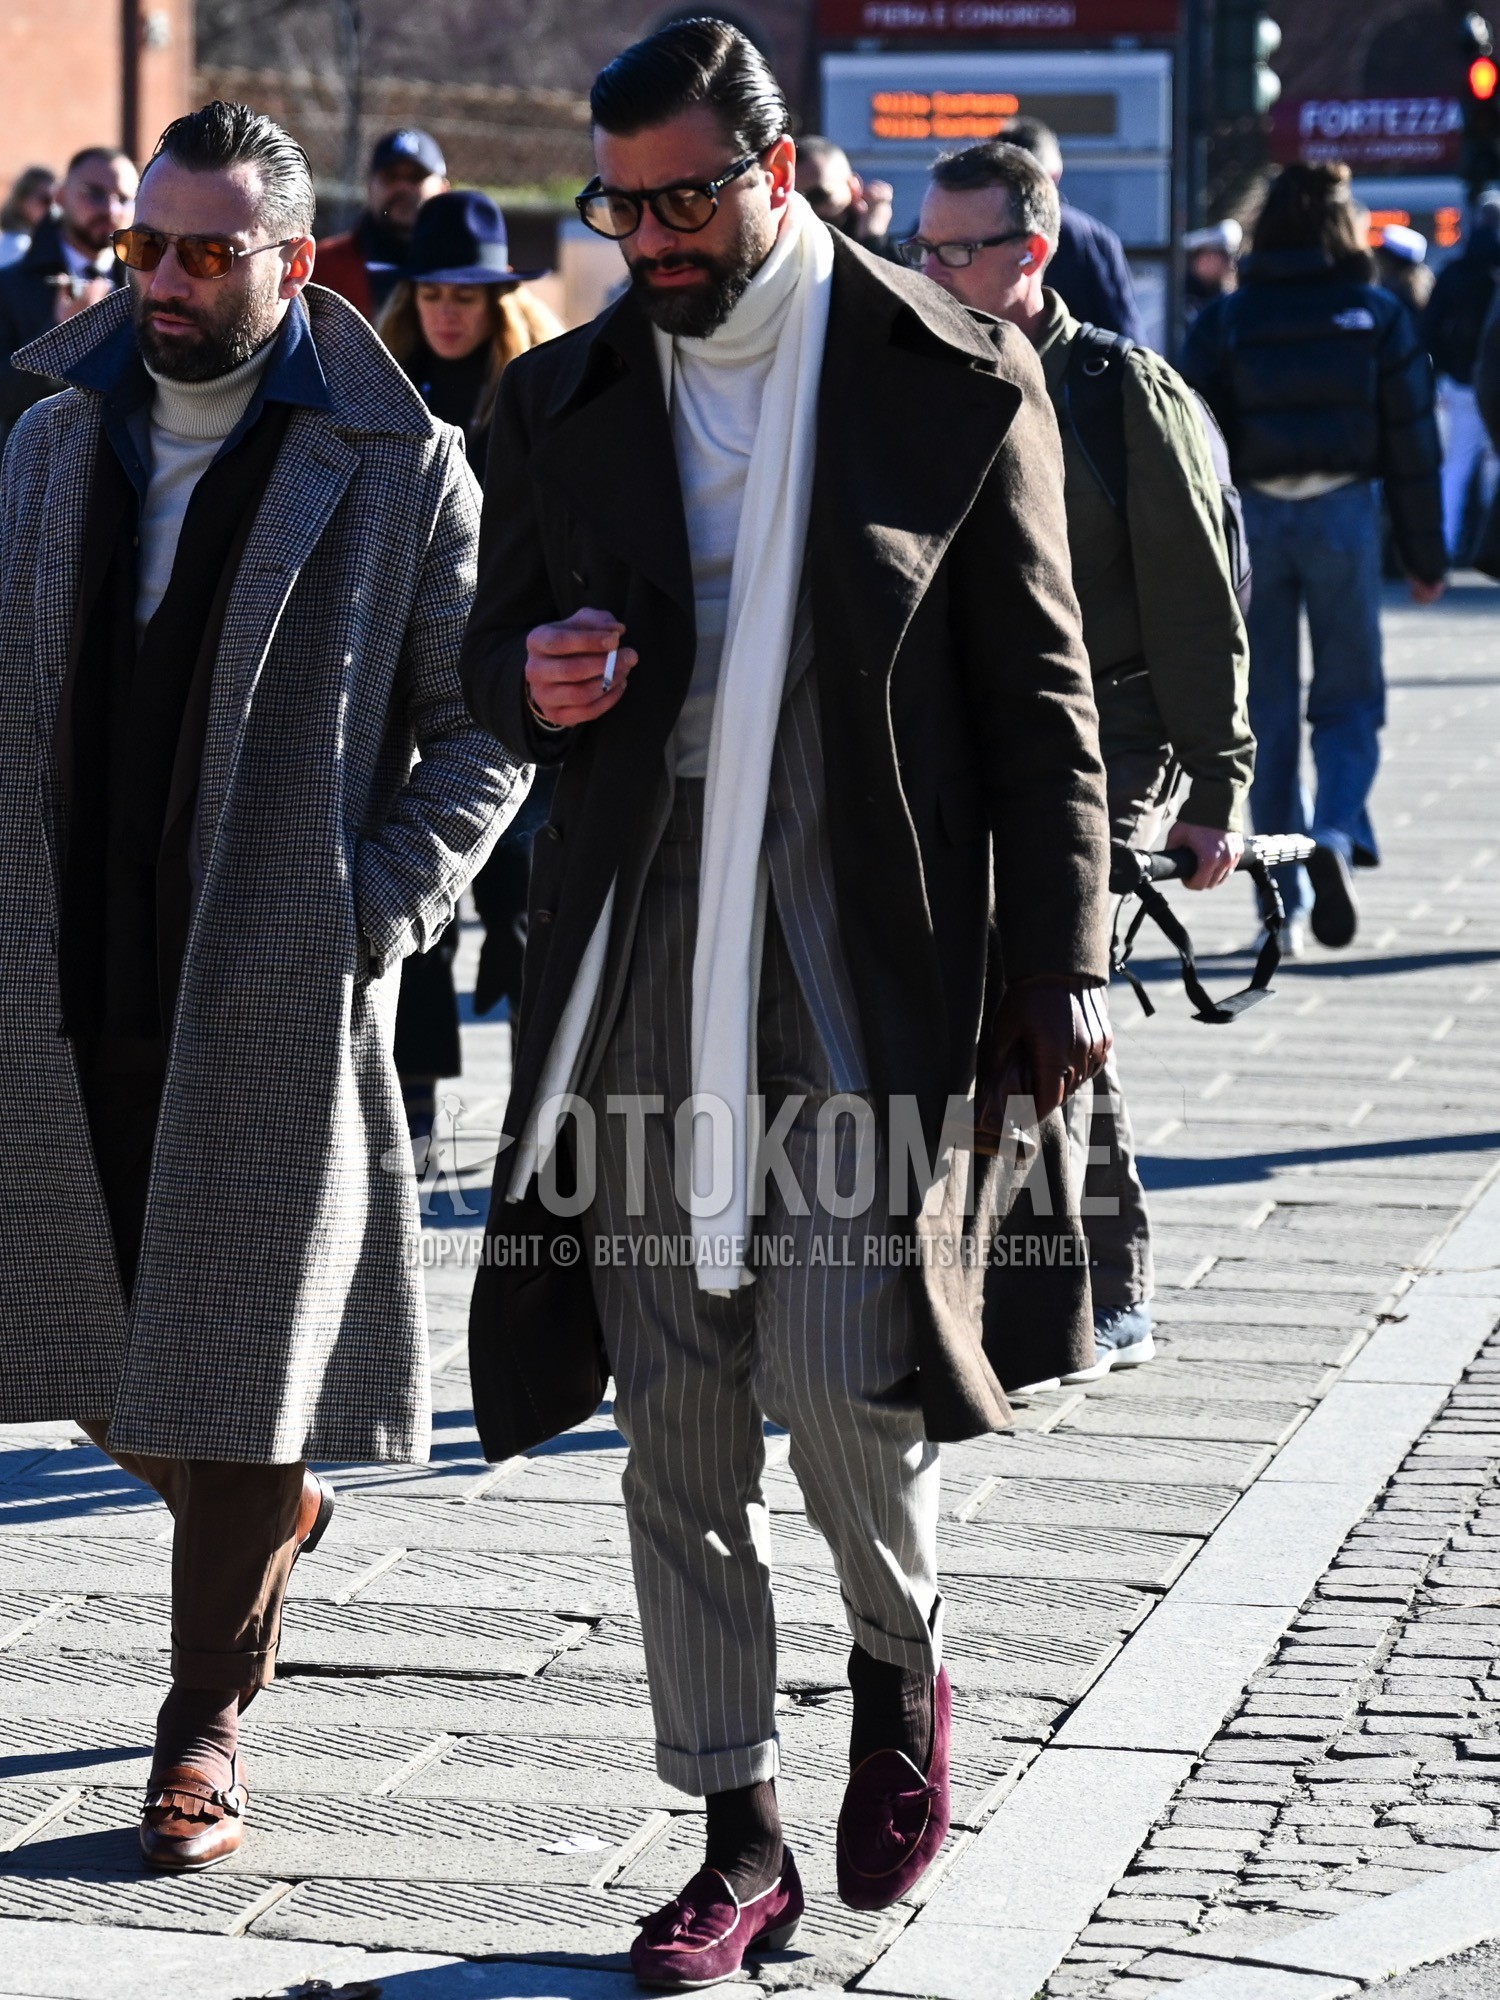 Men's autumn winter outfit with black plain sunglasses, white plain scarf, black plain ulster coat, white plain turtleneck knit, brown plain socks, red tassel loafers leather shoes, red suede shoes leather shoes, gray stripes suit.